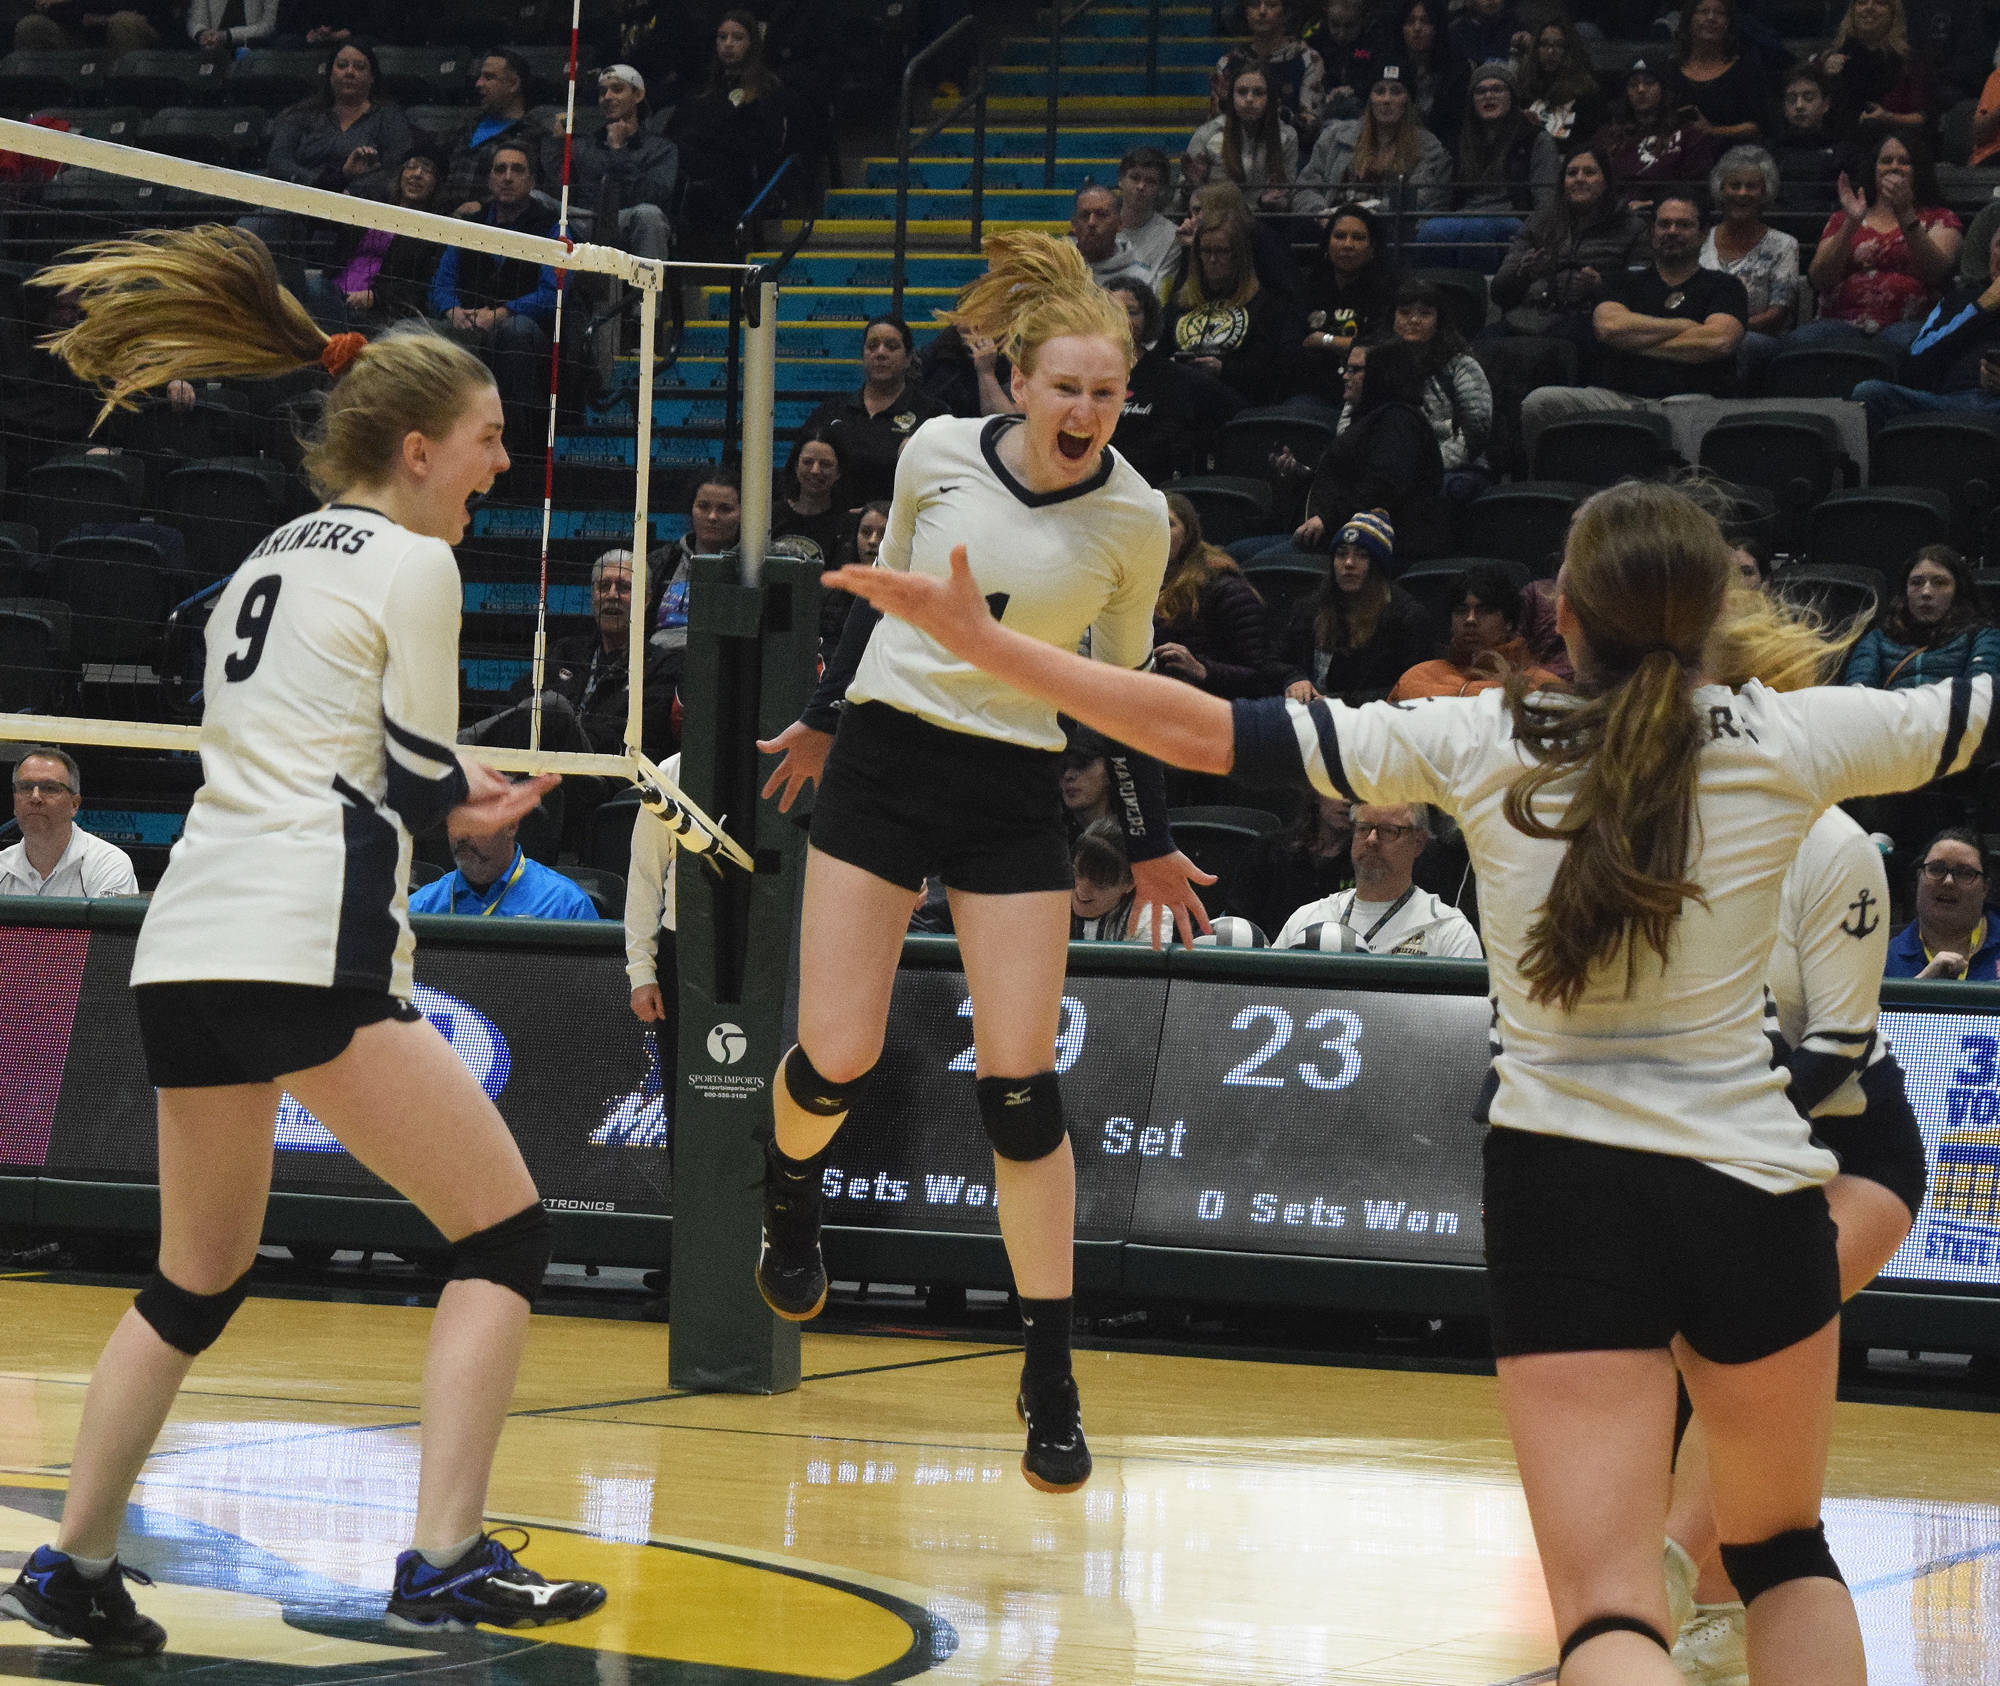 The Homer volleyball team celebrates after scoring the final point Saturday, Nov. 16, 2019, against Kenai Central at the Class 3A state volleyball tournament at the Alaska Airlines Center in Anchorage, Alaska. (Photo by Joey Klecka/Peninsula Clarion)